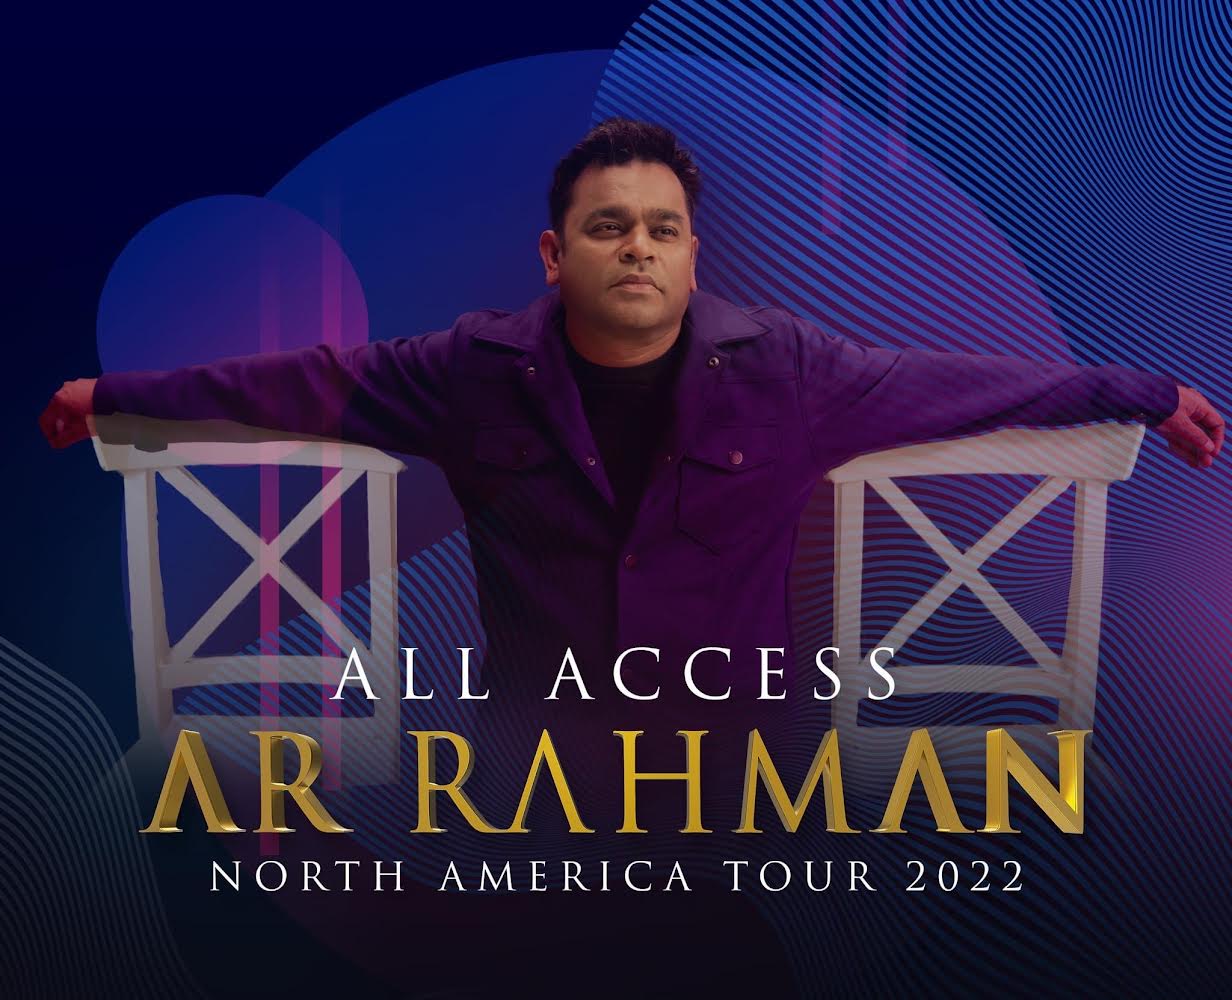 AR Rahman Coming to the US with the All Access Tour!